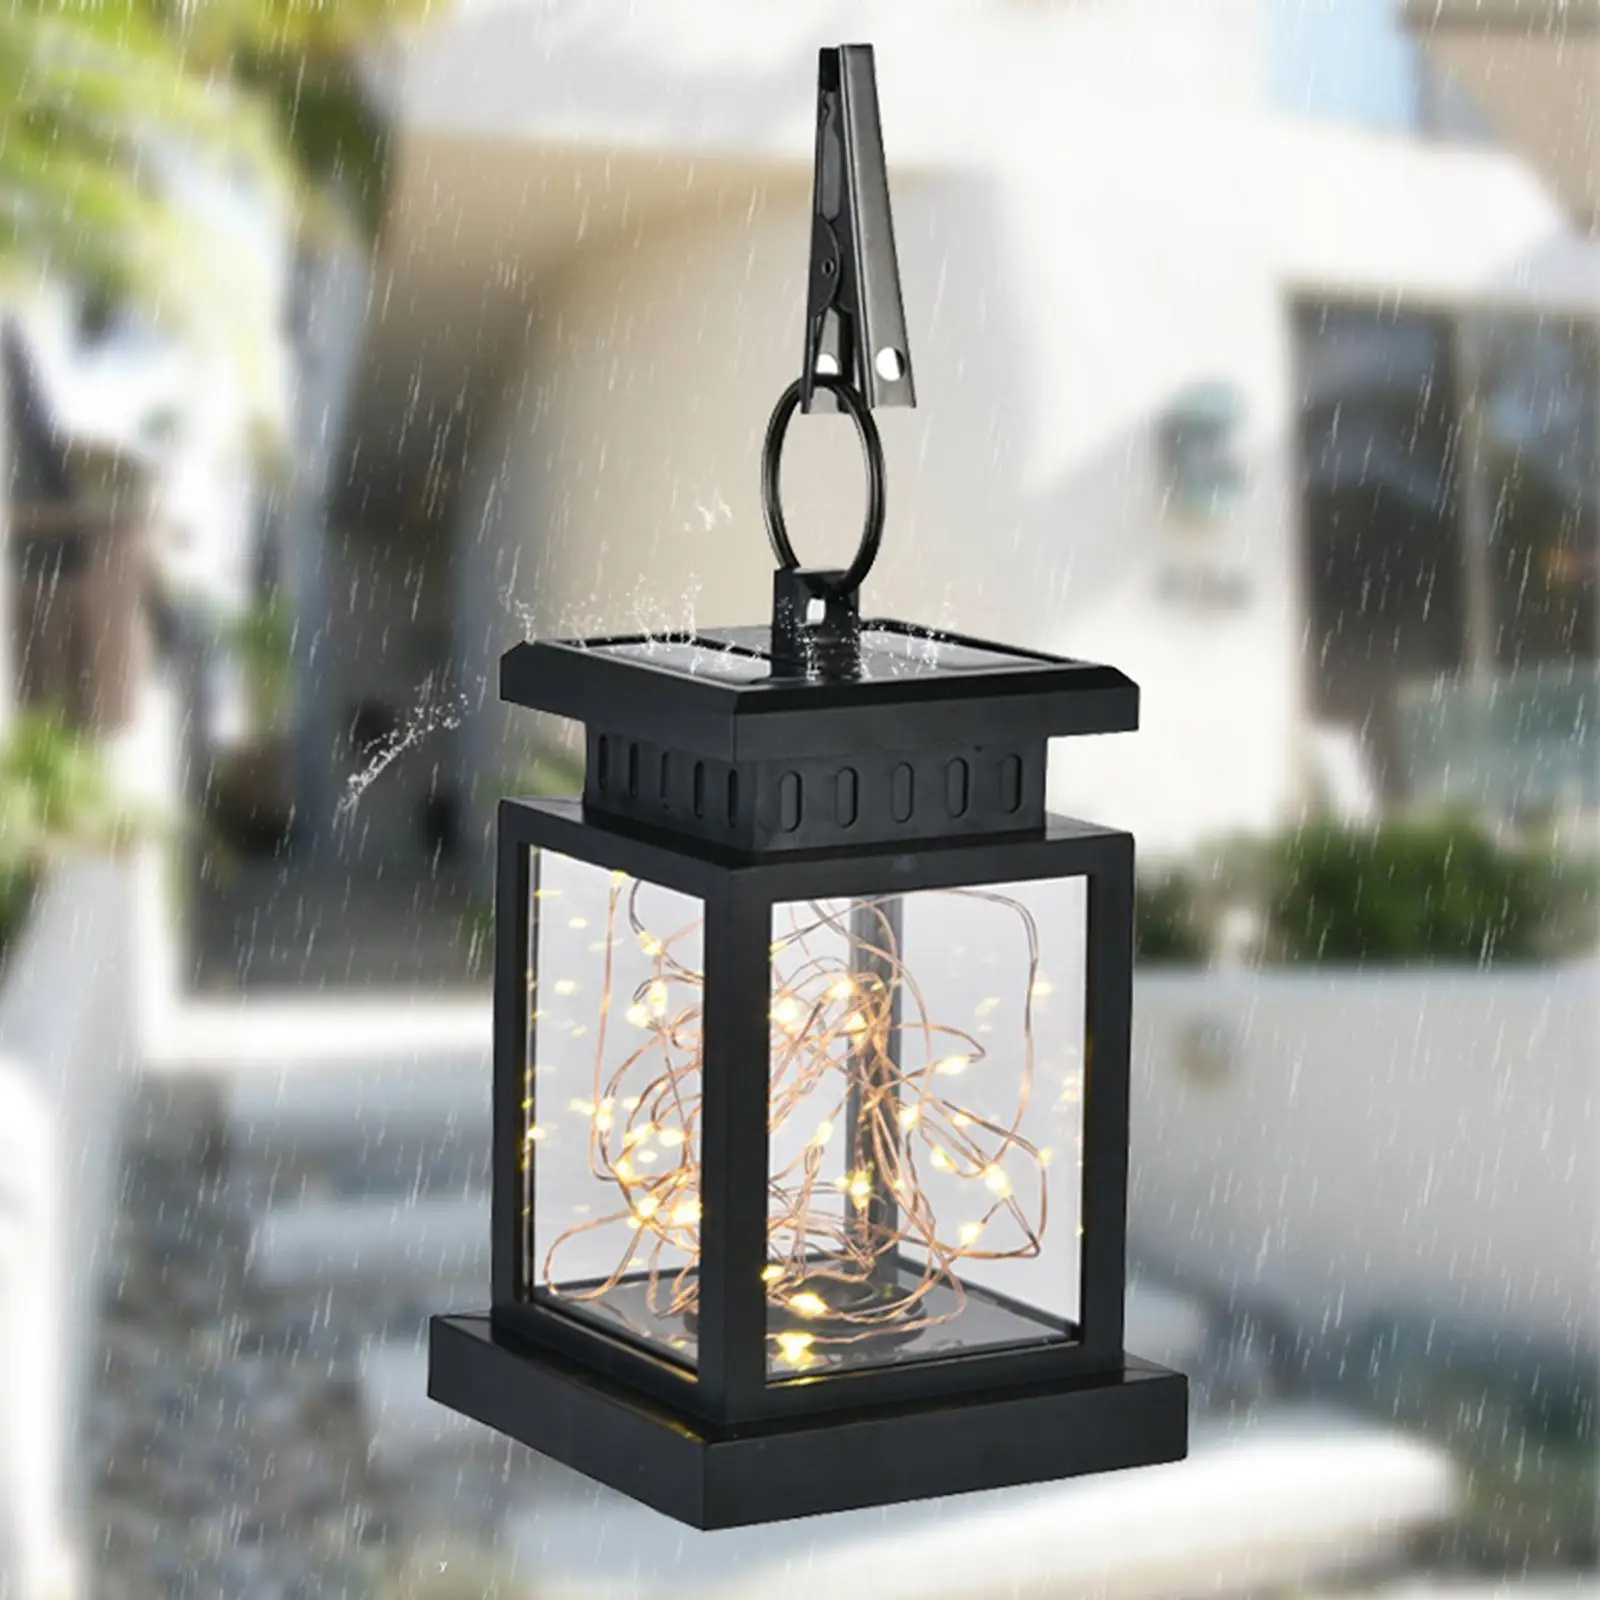 led and solar Hanging Lantern IP55 with Handle Lantern warmer white for Fence Tree Walkway Pathway Decoration